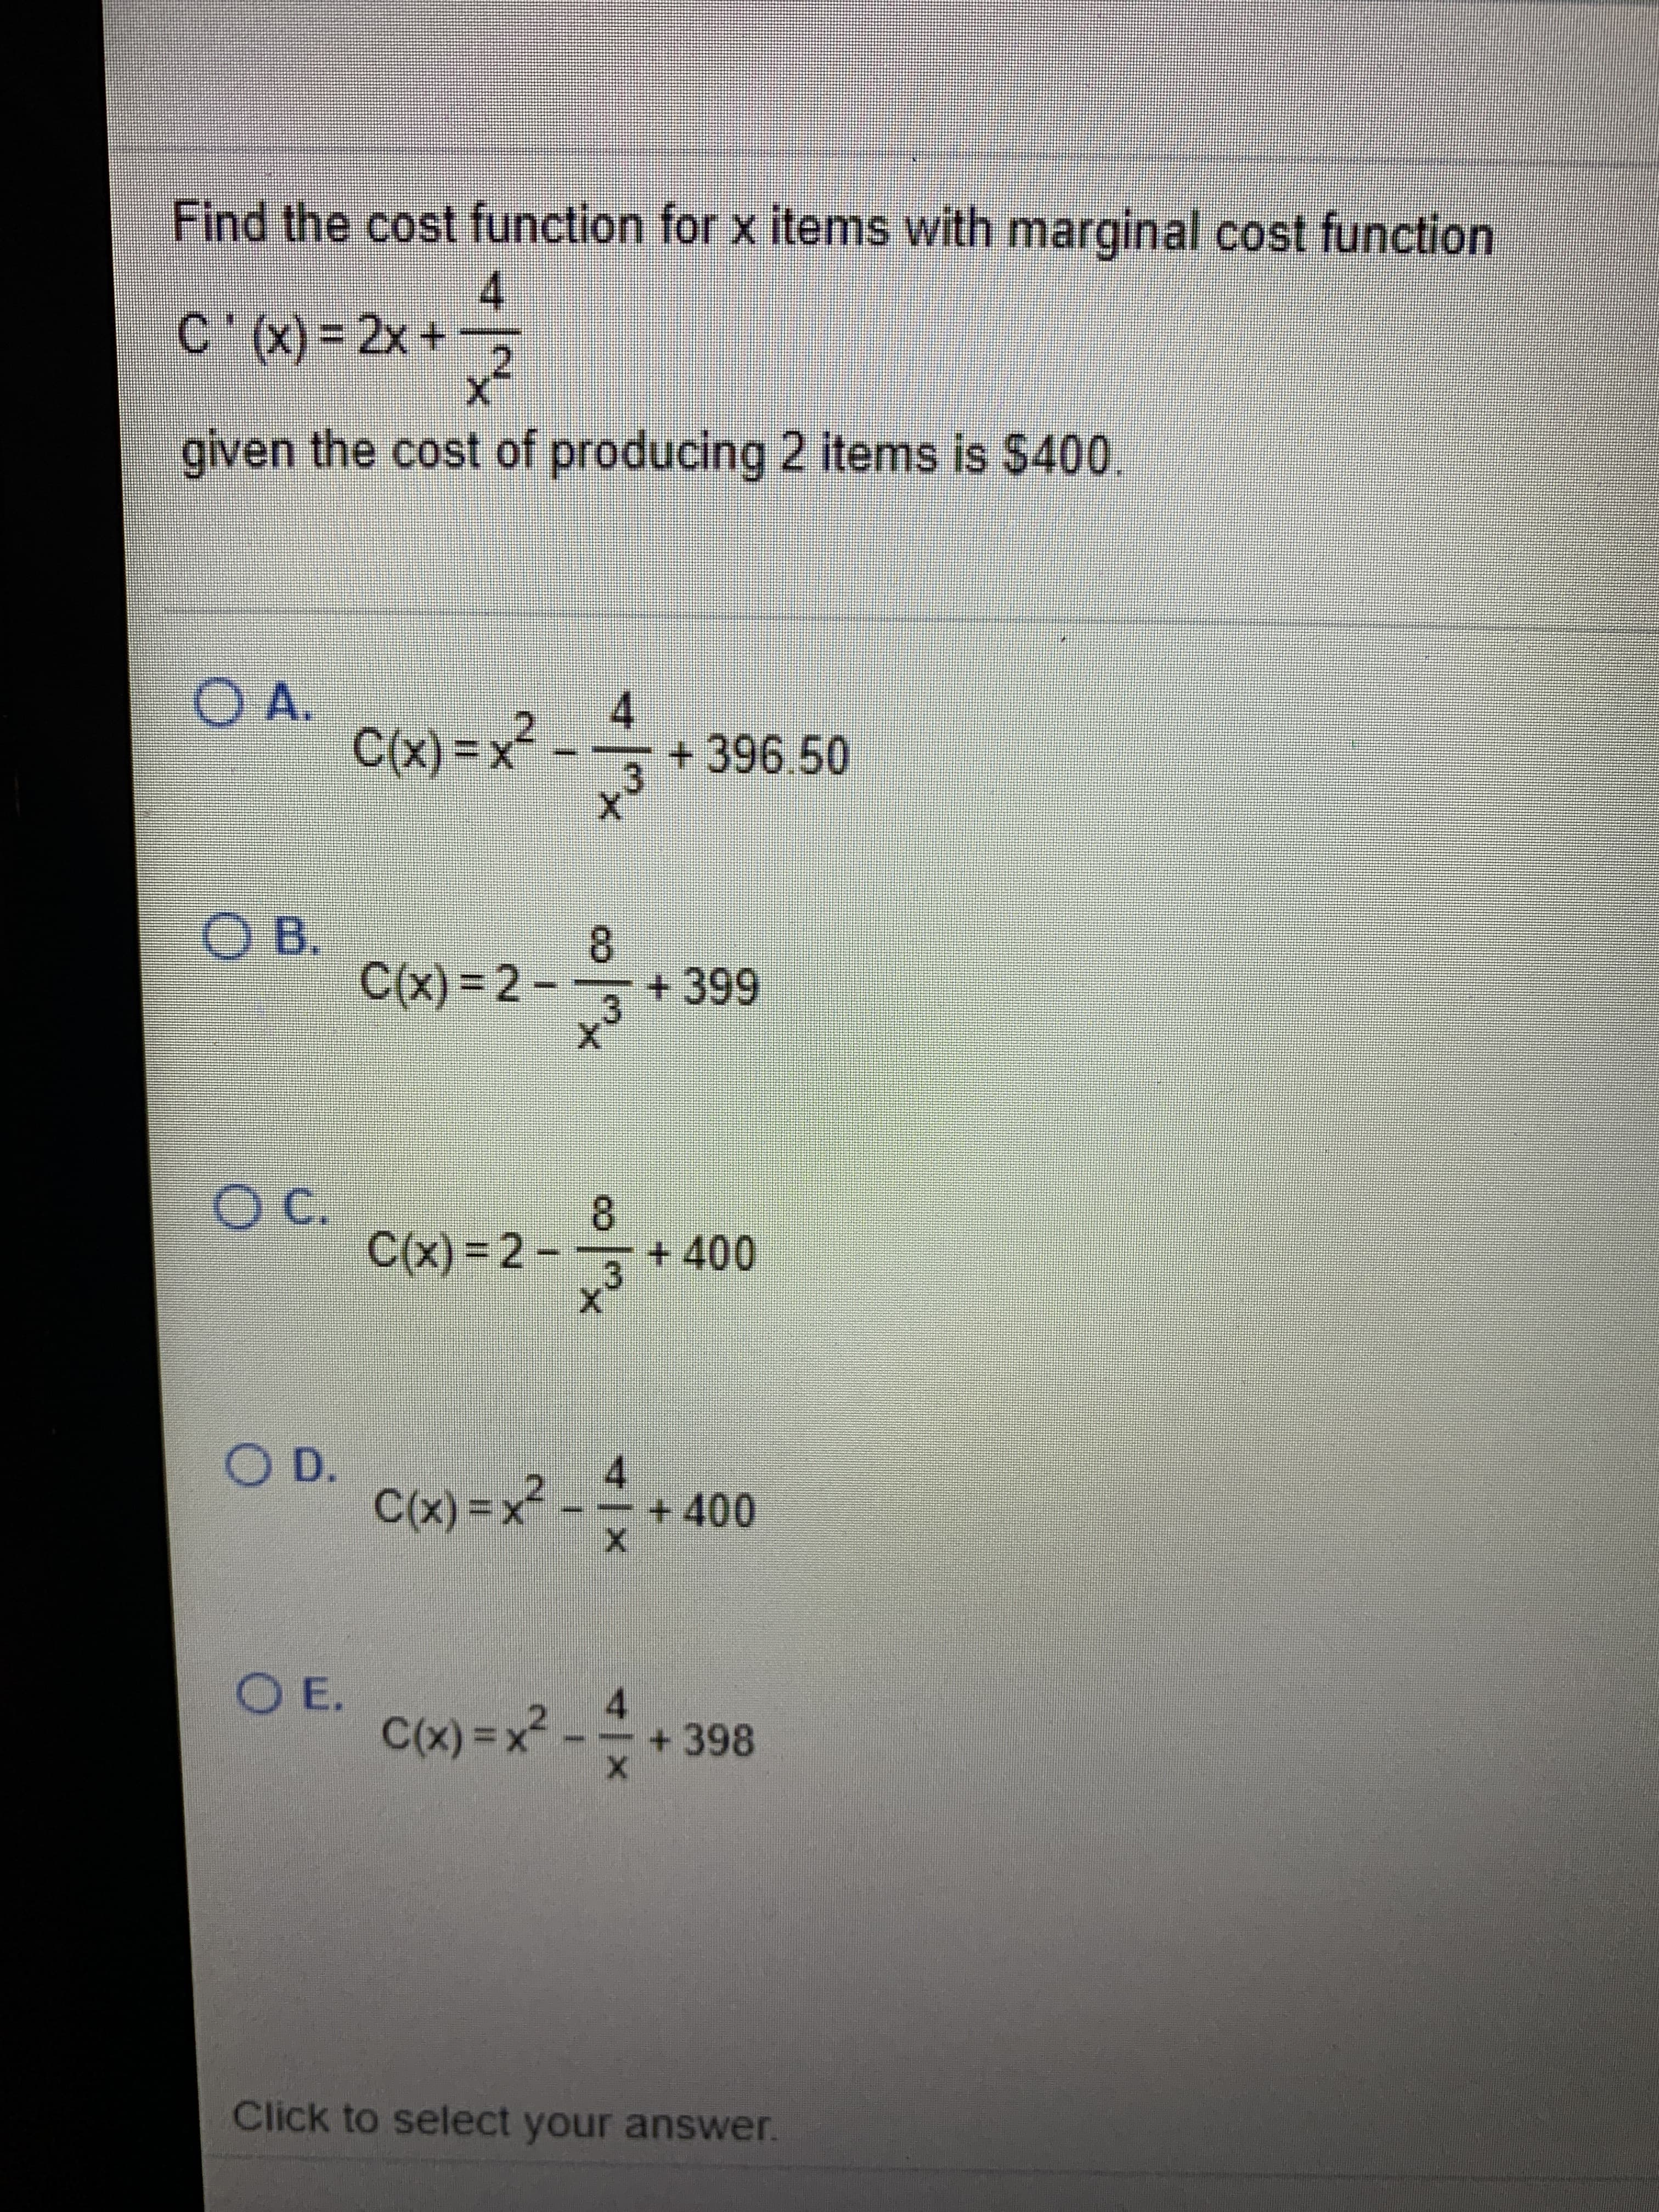 Find the cost function for x items with marginal cost function
4
C'(x) = 2x +
given the cost of producing 2 items is $400.
OA.
C(x) =x²
4.
+396.50
O B.
C(x) = 2 – + 399
%3D
3.
O C.
C(x) = 2 --
cx)=2-
8.
+400
.3
OD.
C(x) =x² - * + 400
O E.
C(x) =x2
+398
Click to select your answer.
